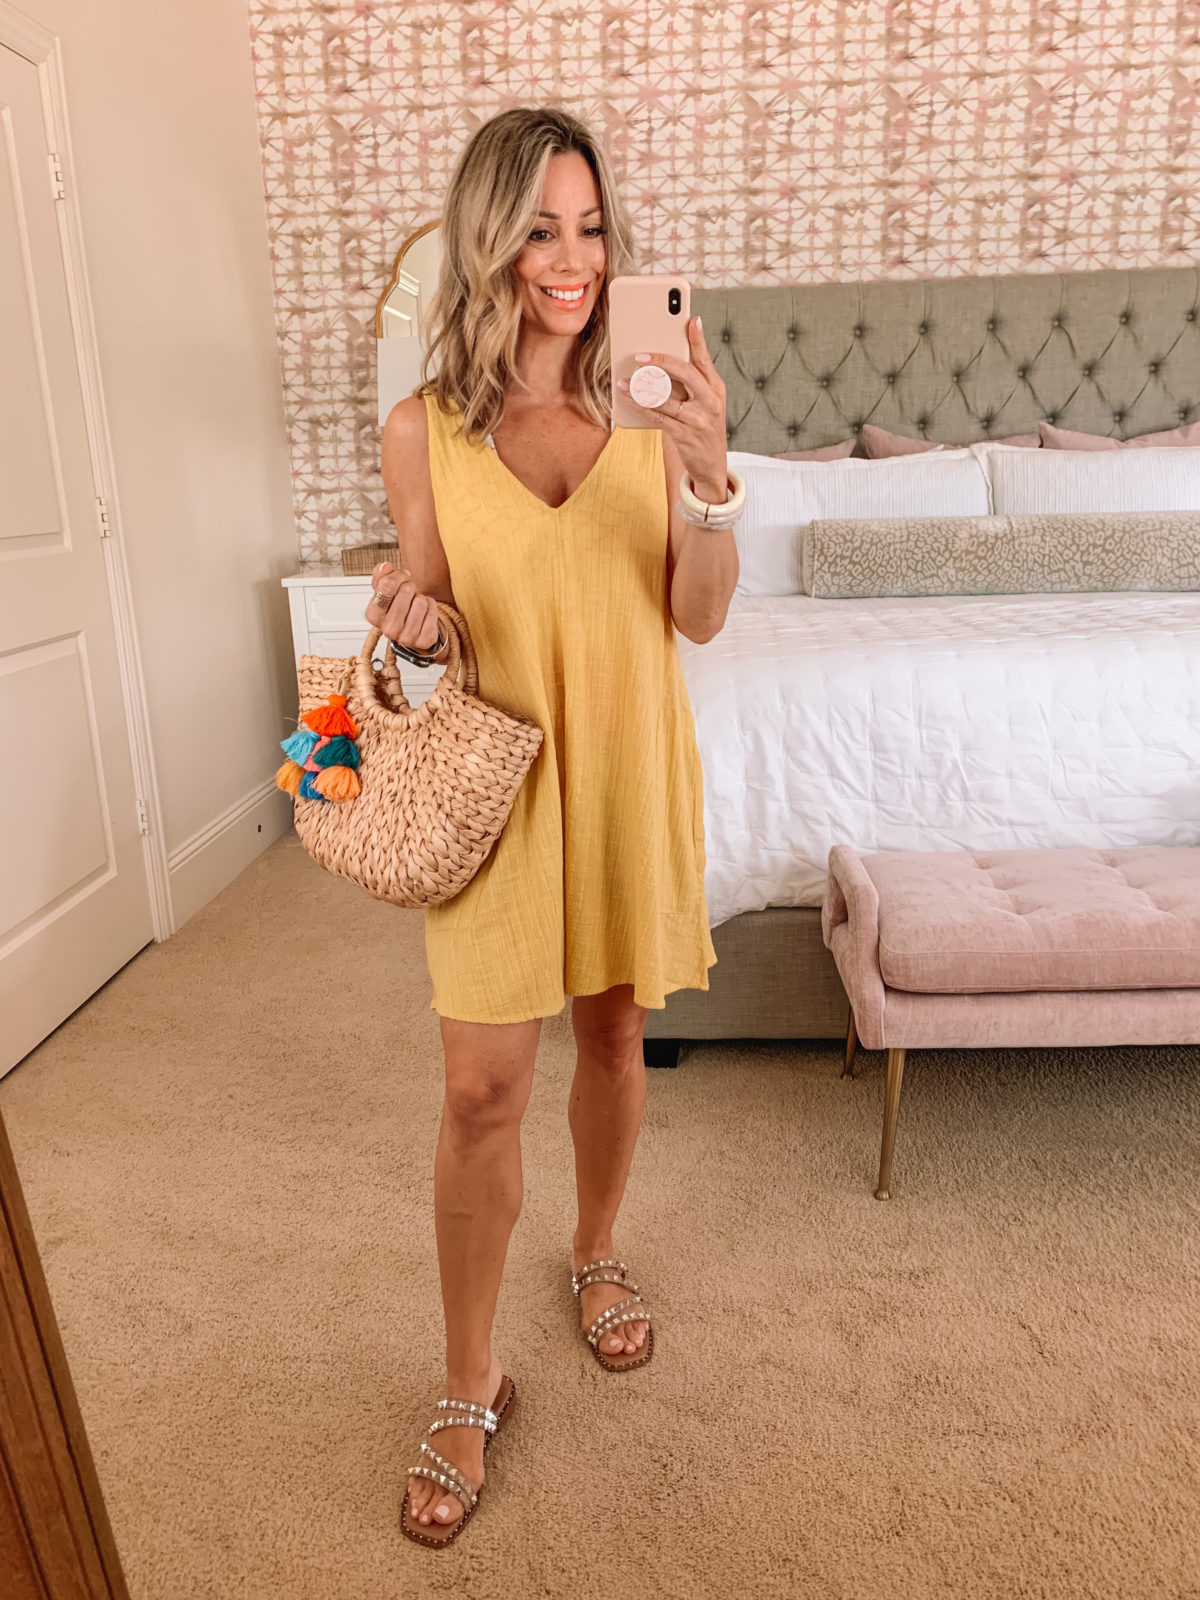 Dressing Room Finds, Yellow CoverUP and Studded Sandals with Woven Tote